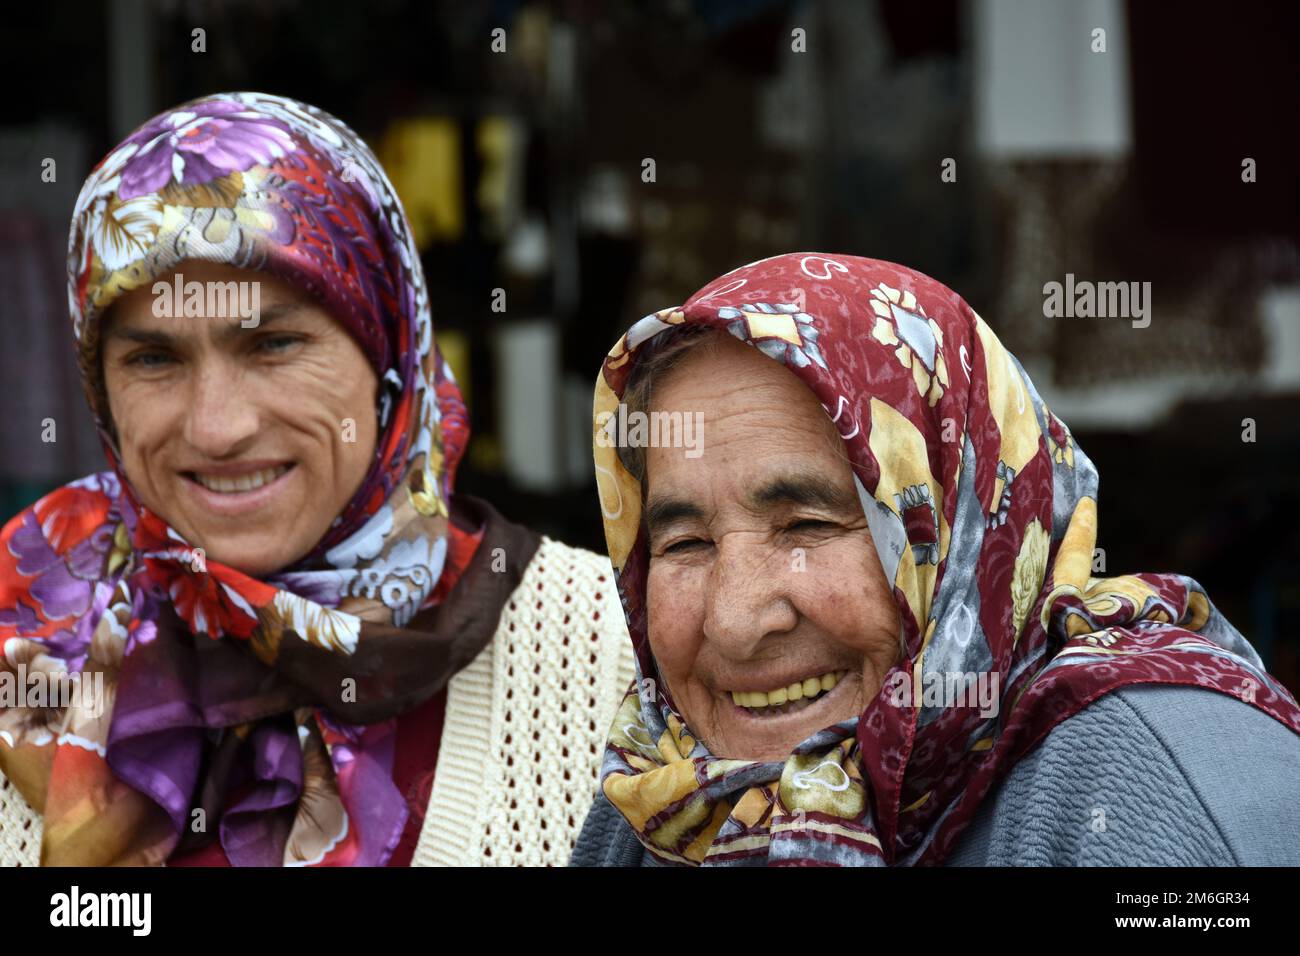 Faces of Turkey: Mature Women in Traditional Head Scarf Stock Photo